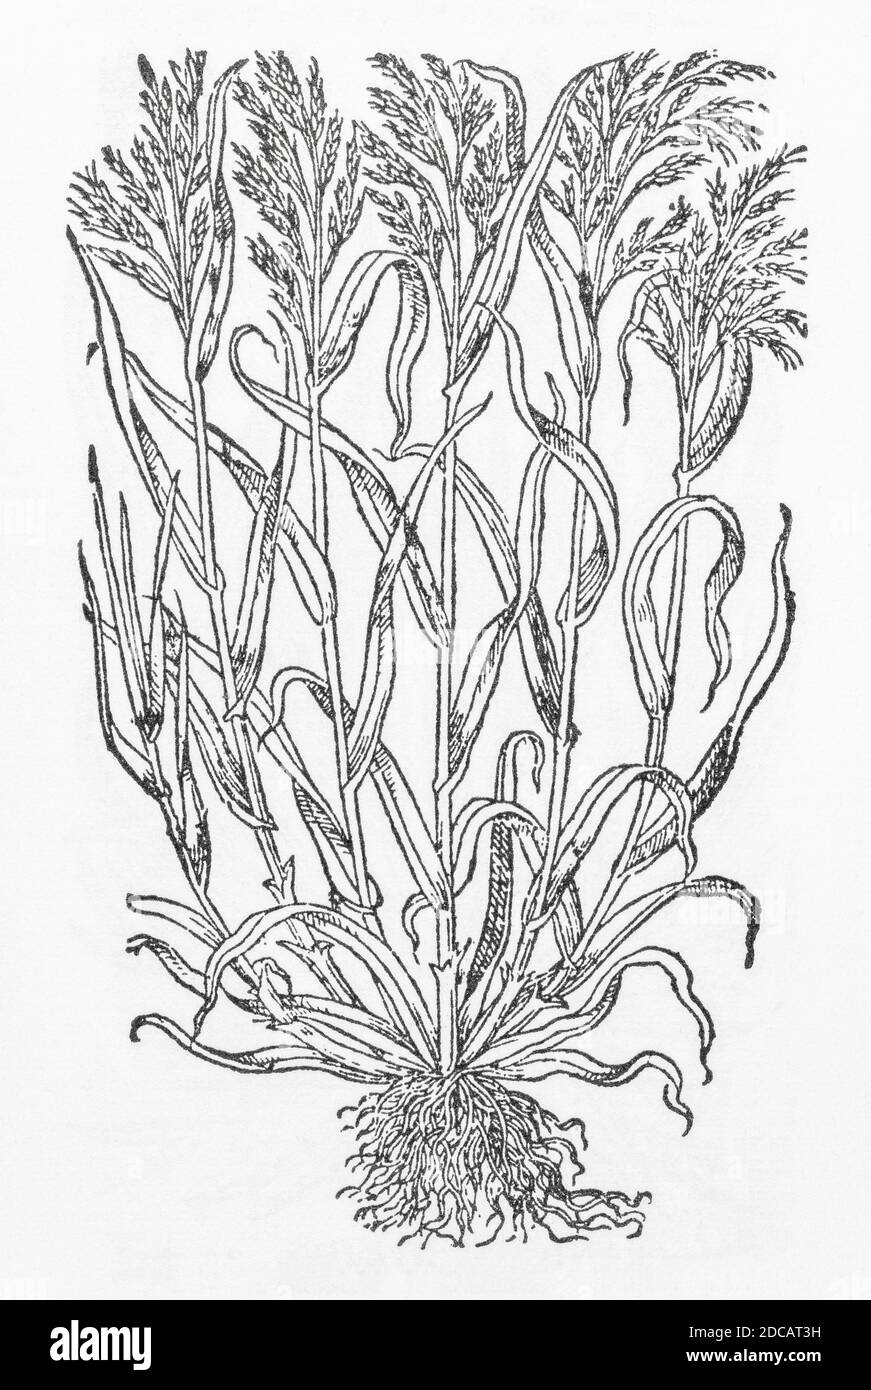 Brome Grass / Bromus plant woodcut from Gerarde's Herball, History of Plants. Gerard refers to it as 'Small wilde Otes' / Bromos altera. P69 Stock Photo